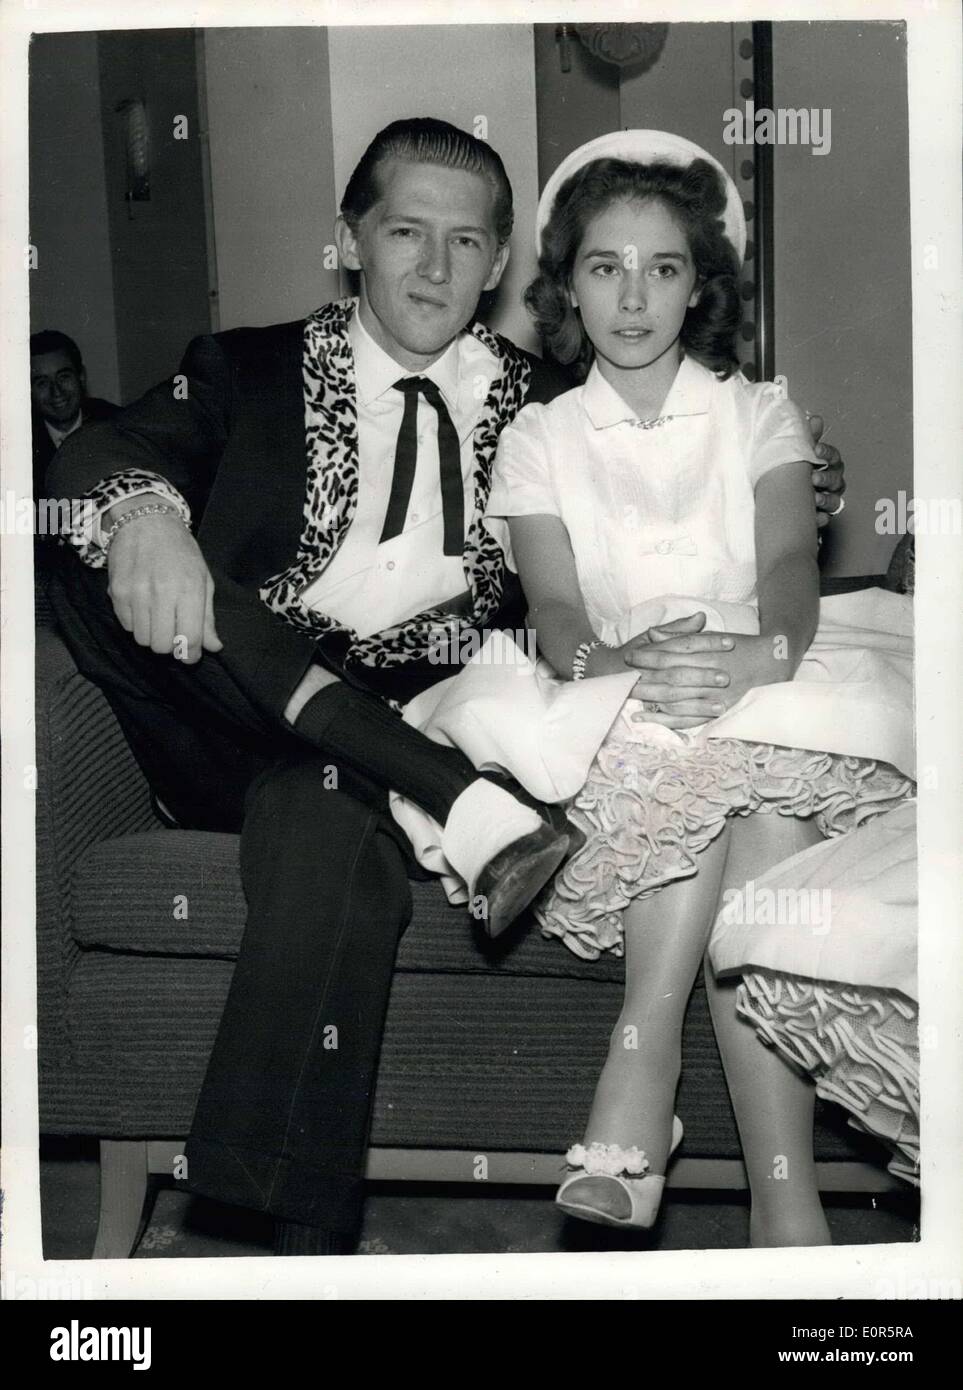 May 26, 1958 - HOME OFFICE TO INVESTIGATE MARRIAGE OF JERRY LEE LEWIS. The Home Office is tomorrow to investigate the marriage muddle of the 22-year old America Rock n' Roll singer, Jerry Lee Lewis, who is here on a tour and his 13-year old wife, Myra. Lewis and Myra are staying in London. During the week-end it was discovered that their marriage last December was five months before his divorce from his second wife became final. Myra's father, Mr. J.W. Brown, his wife, Lois and his son, are staying at the same hotel, in London Stock Photo